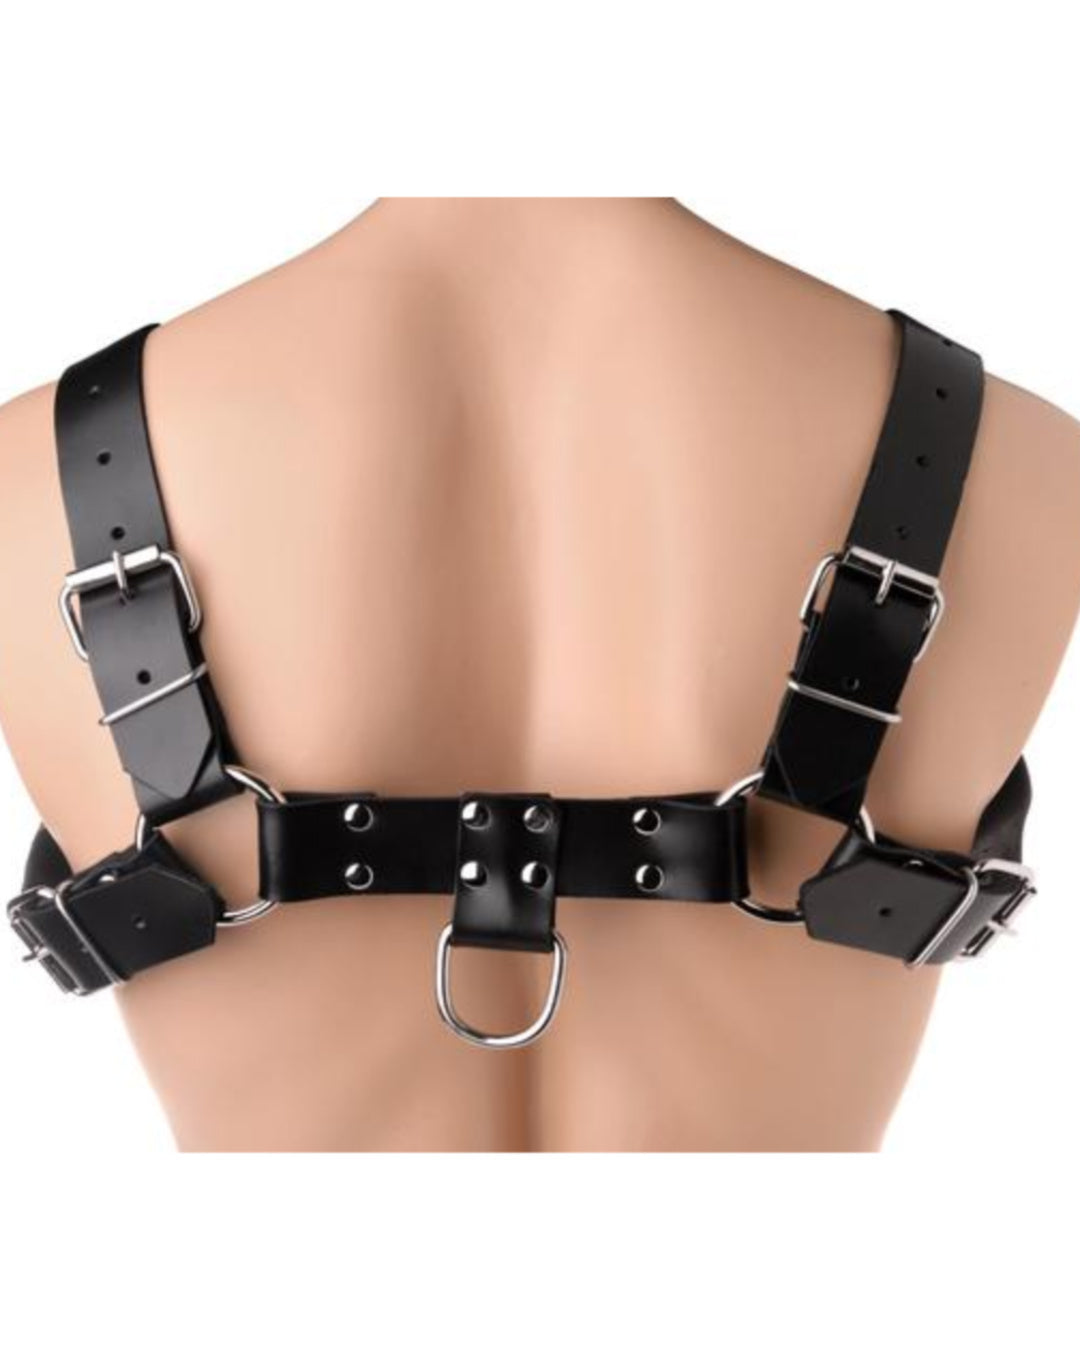 English Bull Dog Leather Harness - Black  on Mannequin Back